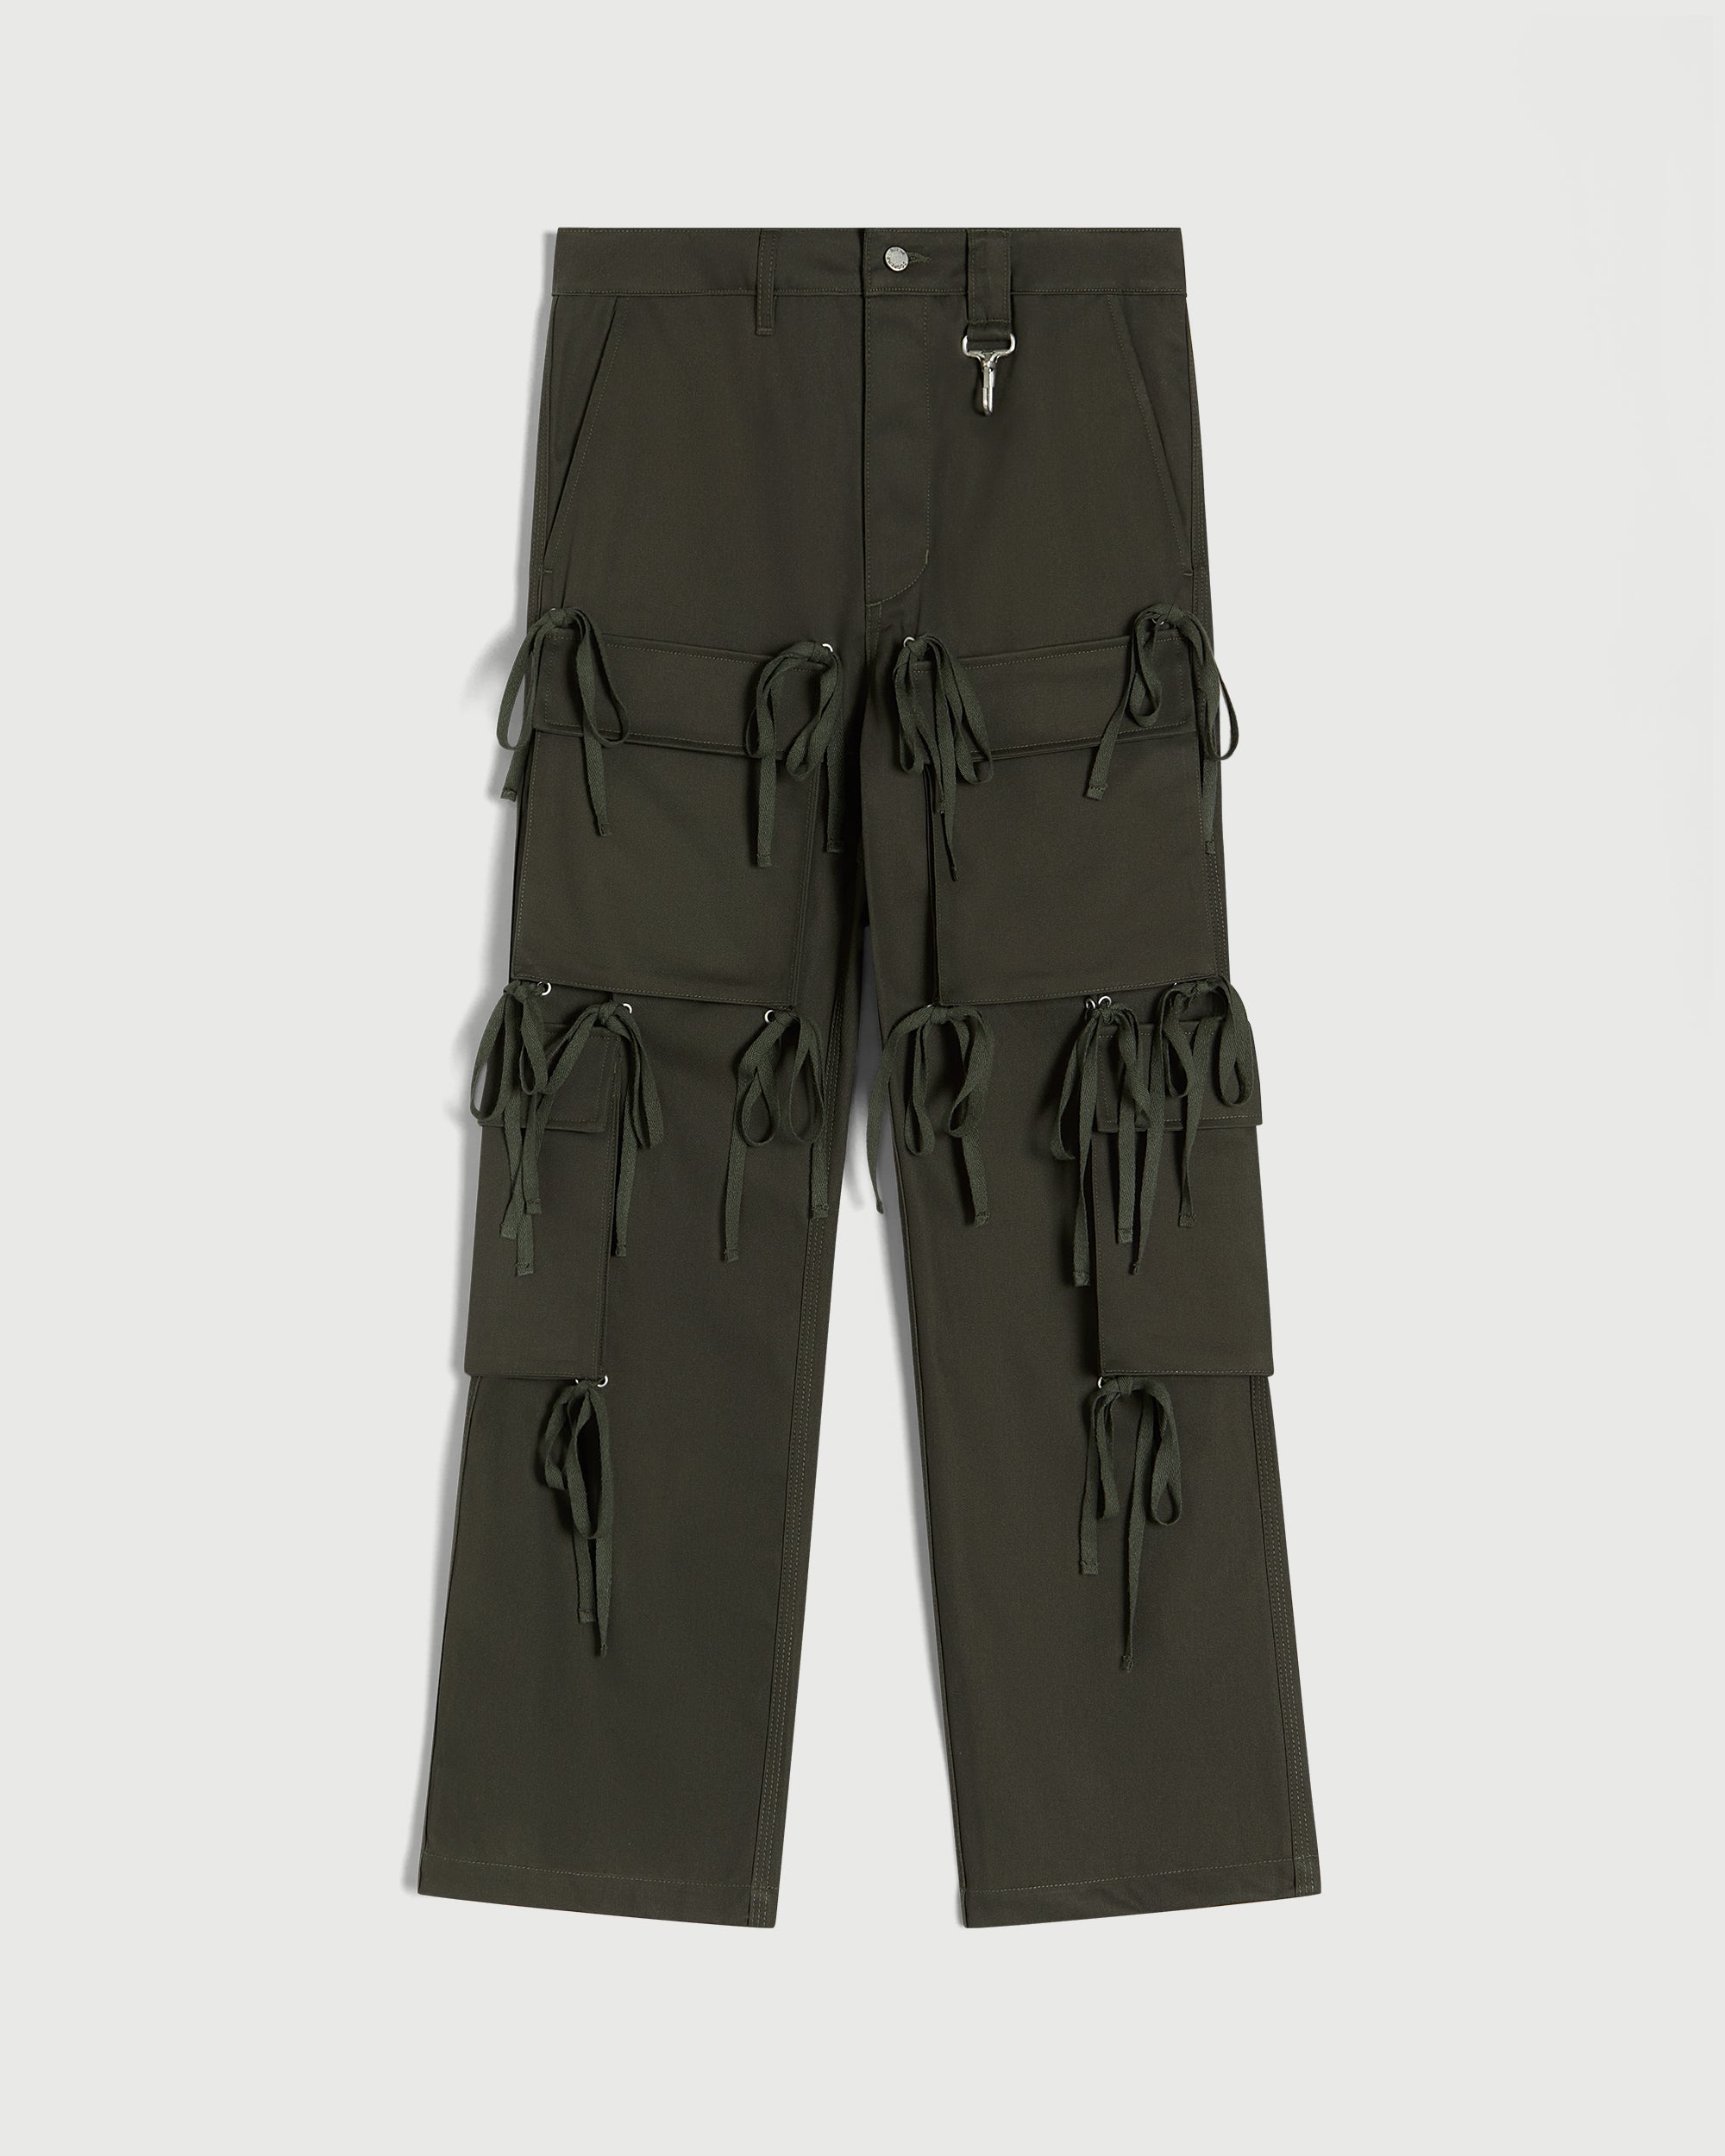 Olive Green Women's Pants for sale in San Francisco, California